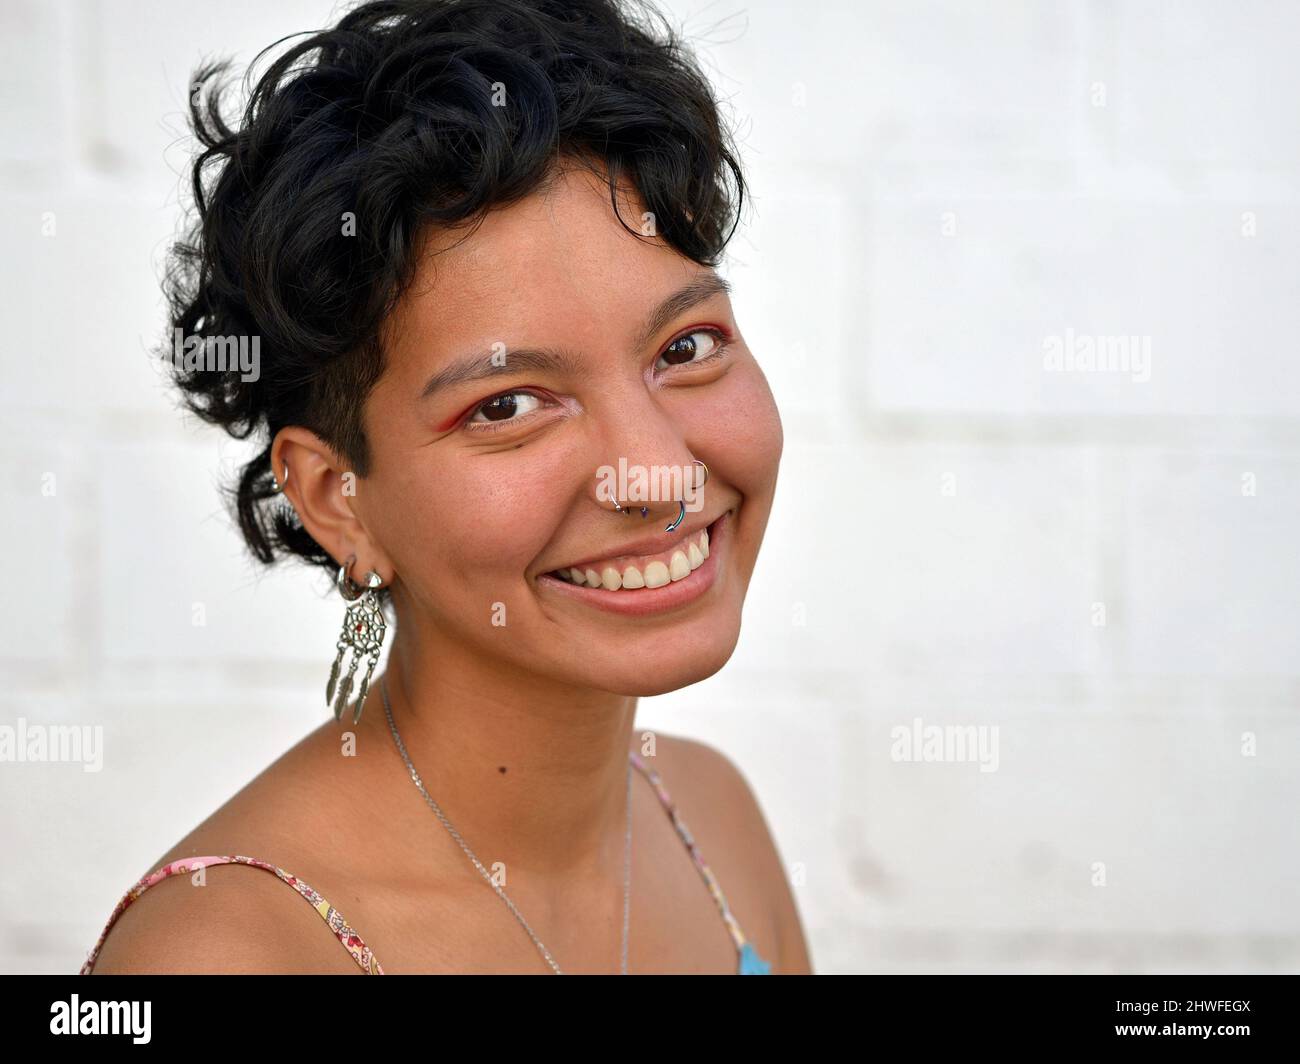 Young positive optimistic beautiful fresh Mexican Latina woman with short curly hair and nose piercings smiles for the viewer. Stock Photo